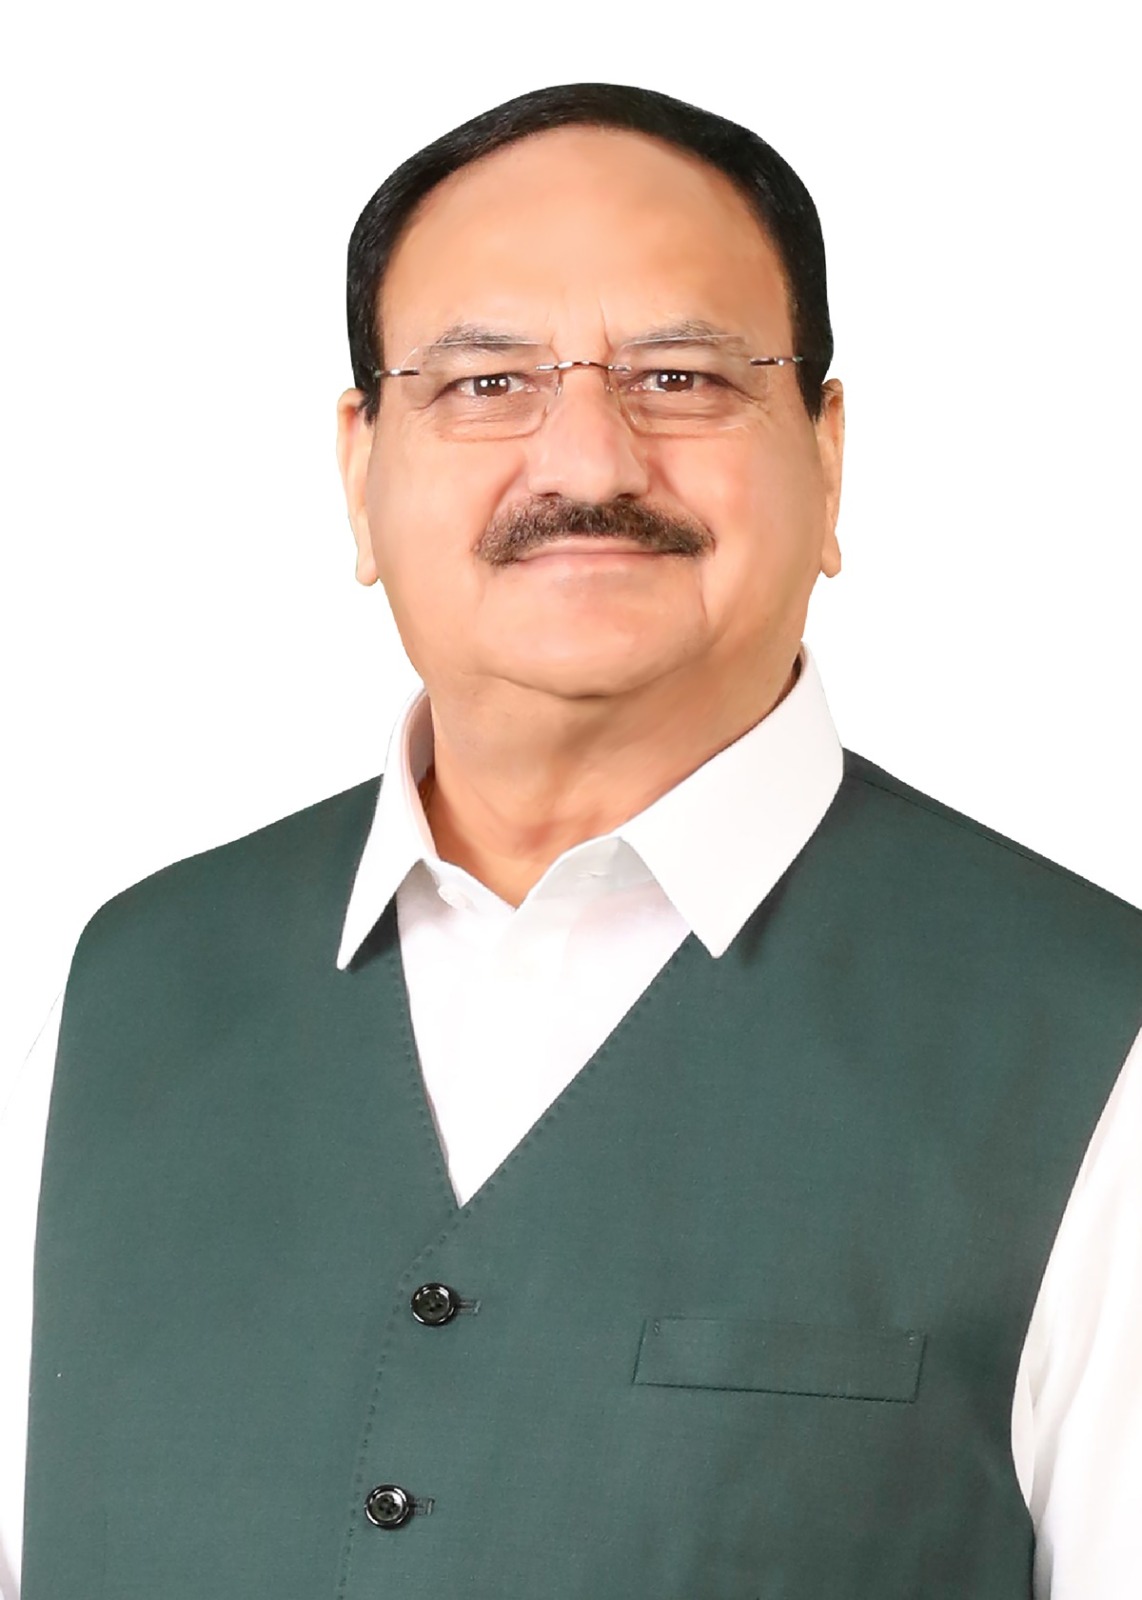 Sh. Jagat  Prakash Nadda, Union Minister, Health and Family Welfare and Chemicals and Fertilizers, Government of India